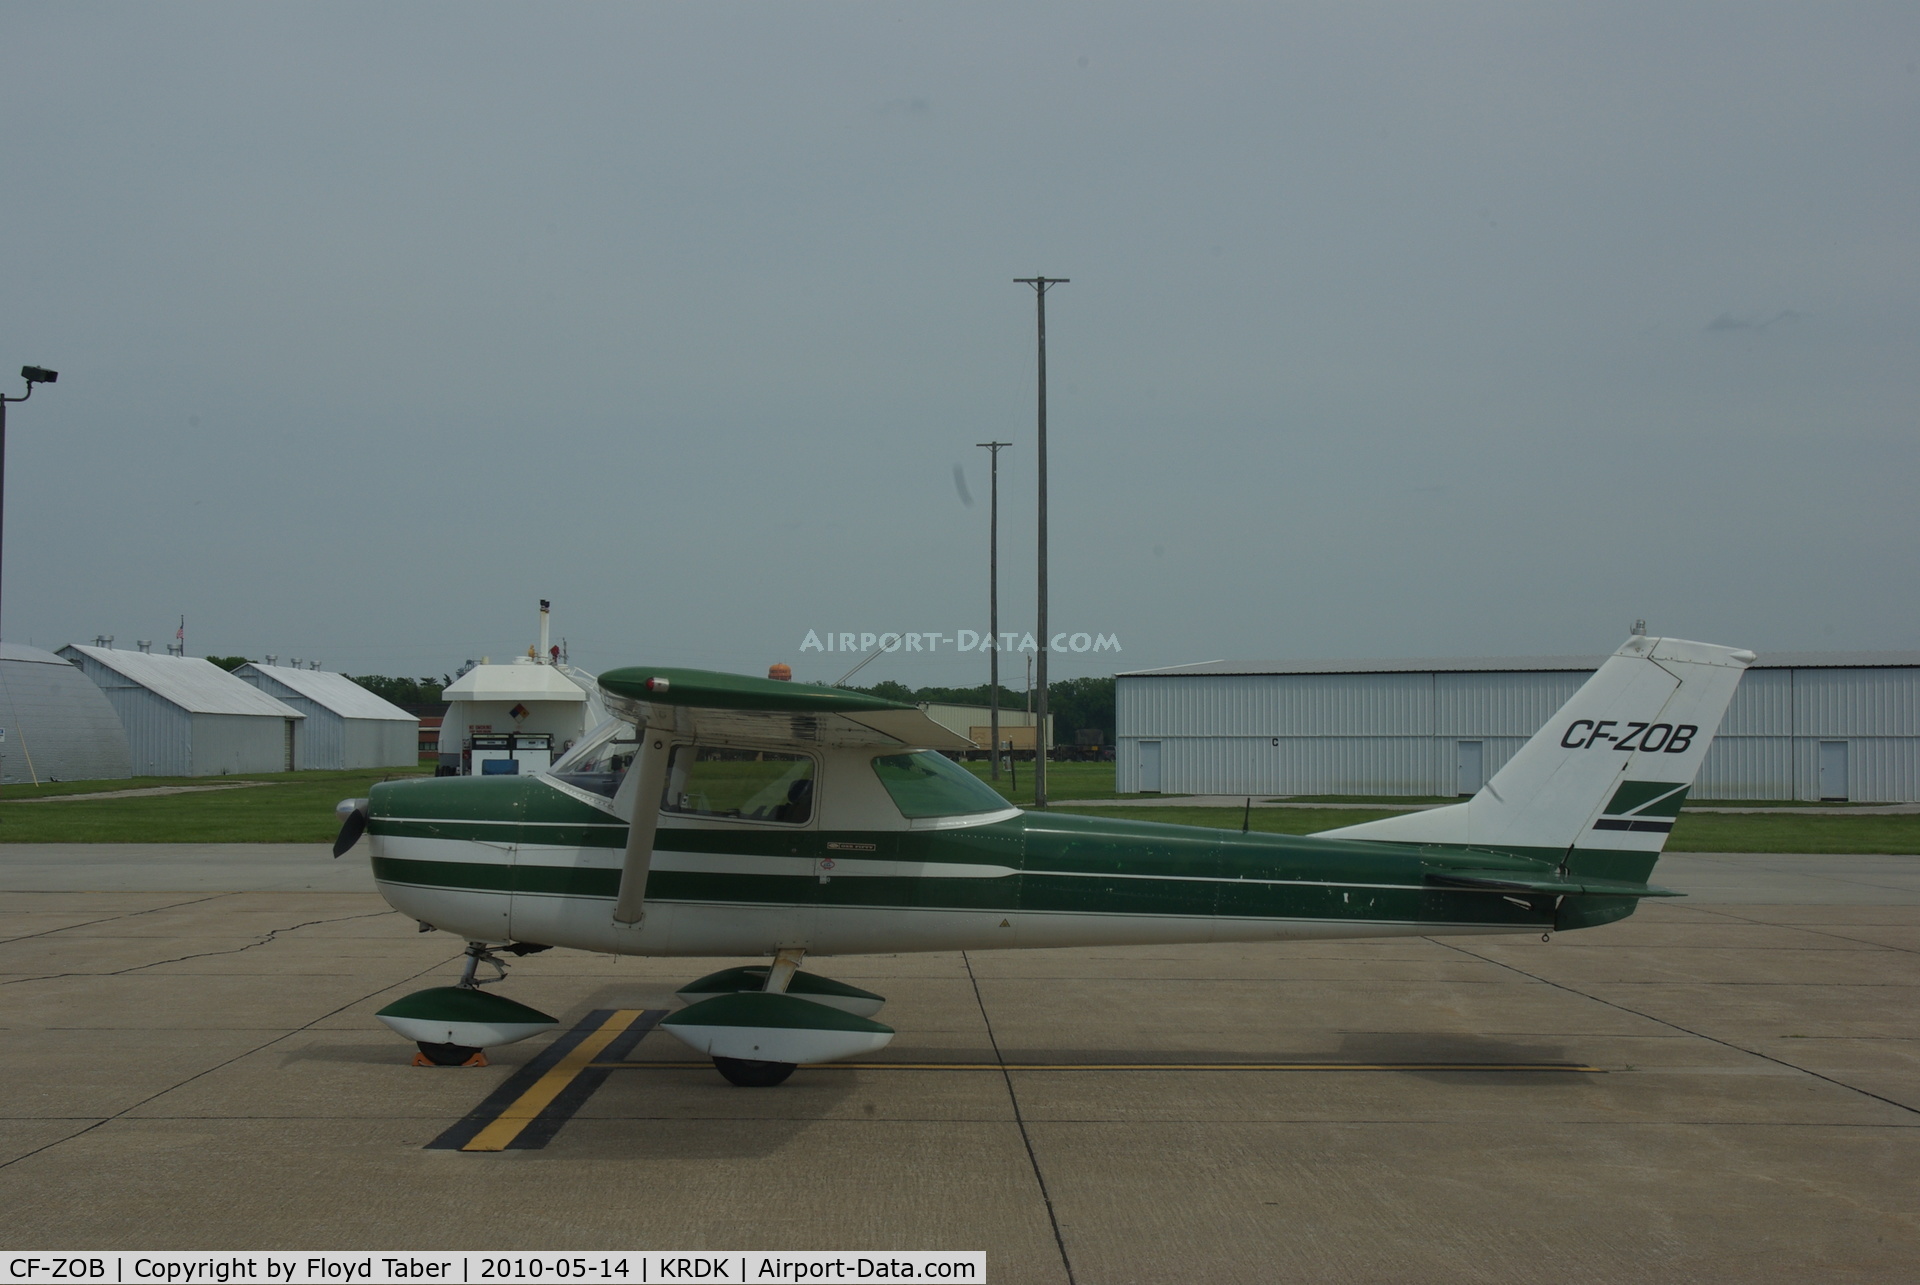 CF-ZOB, 1967 Cessna 150G C/N 15065544, flew in for fuel